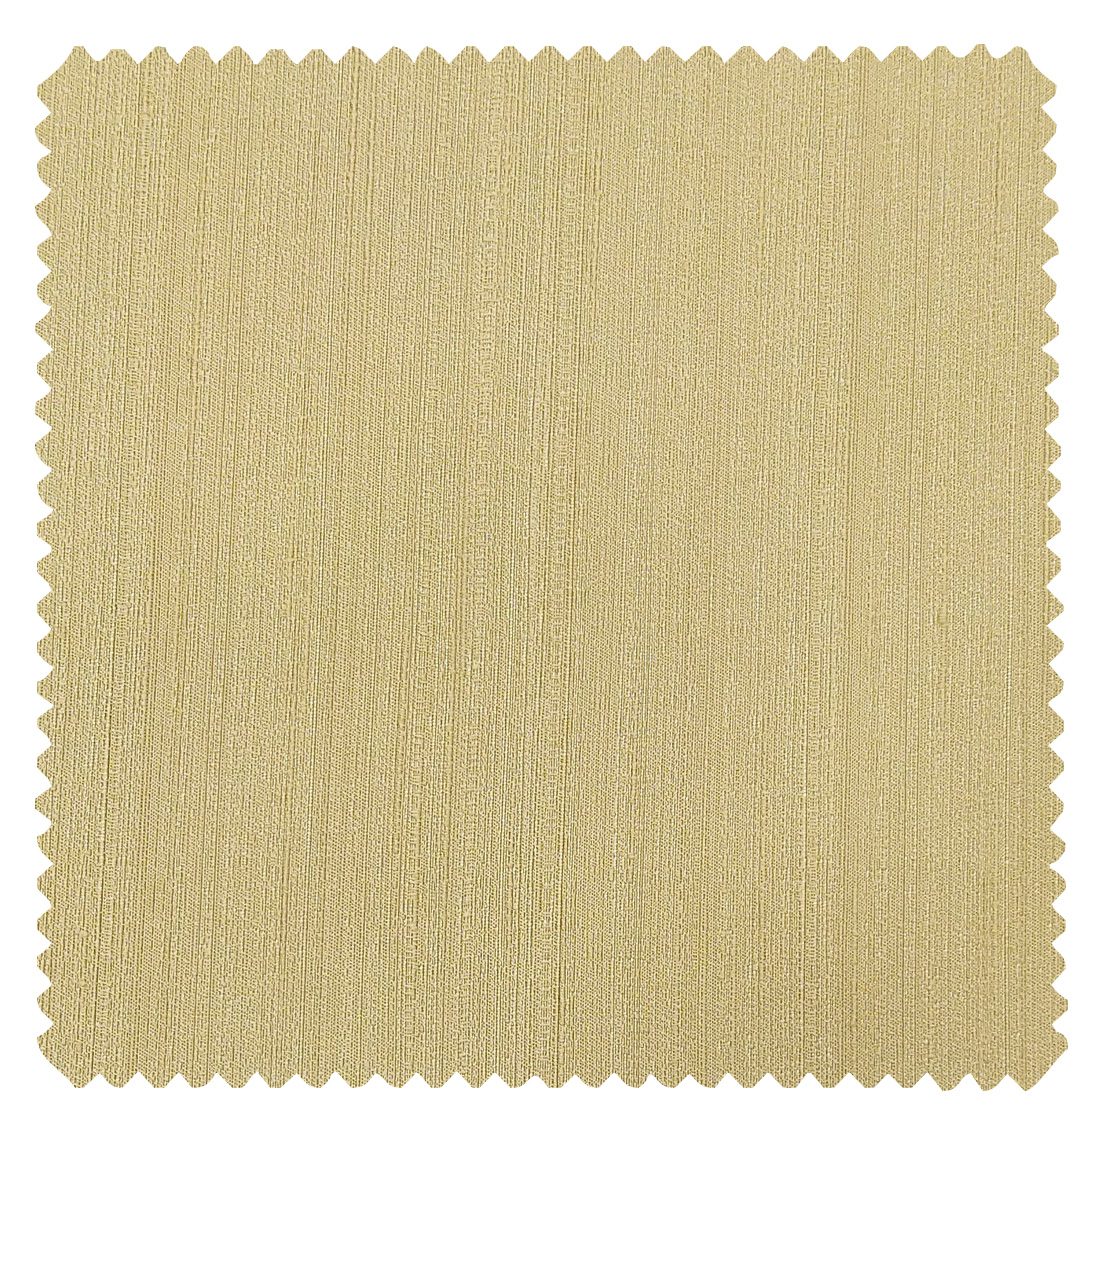 Don & Julio Men's Beige Terry Rayon Self Design Shiny Unstitched Suiting Fabric - 2 Meter